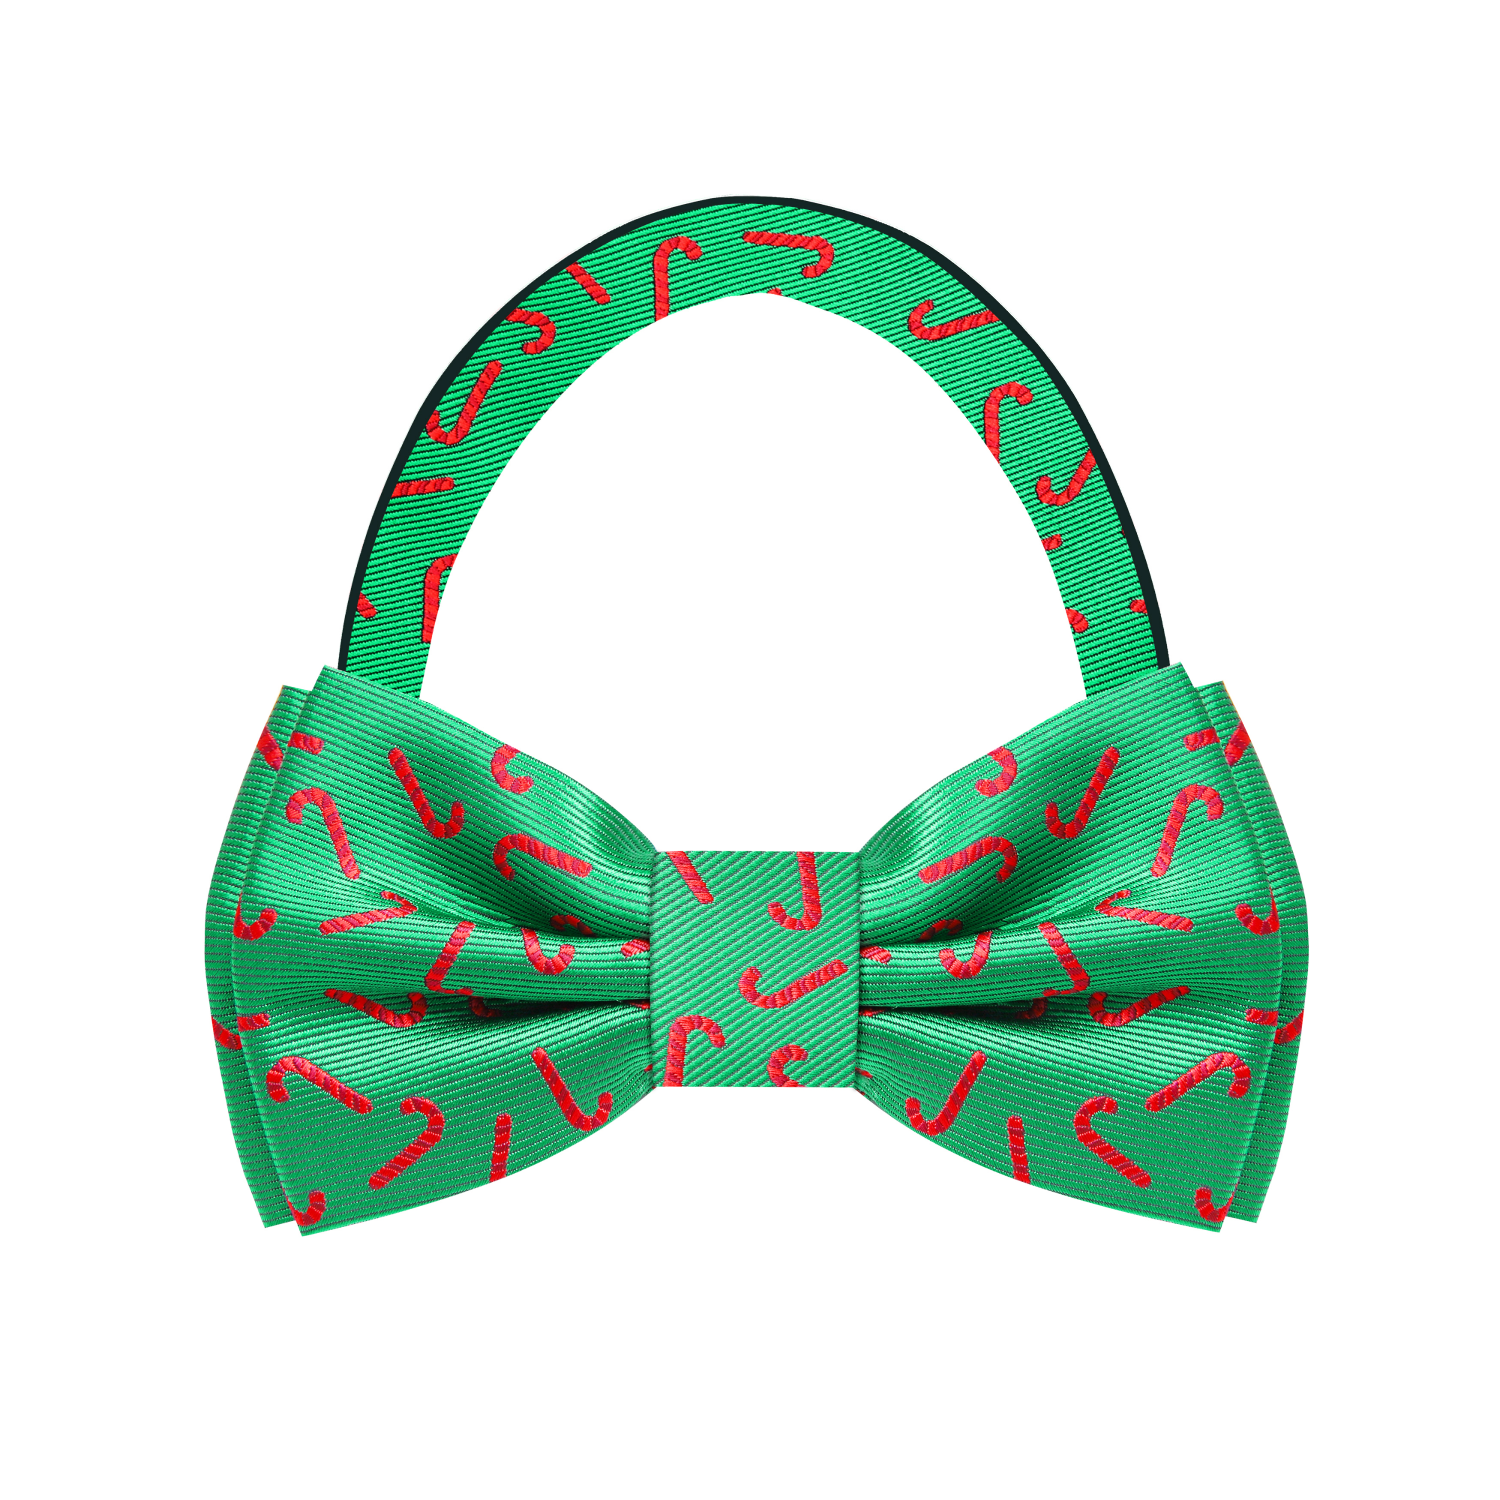 Green Silk with Red Candy Cane Bow Tie Pre Tied